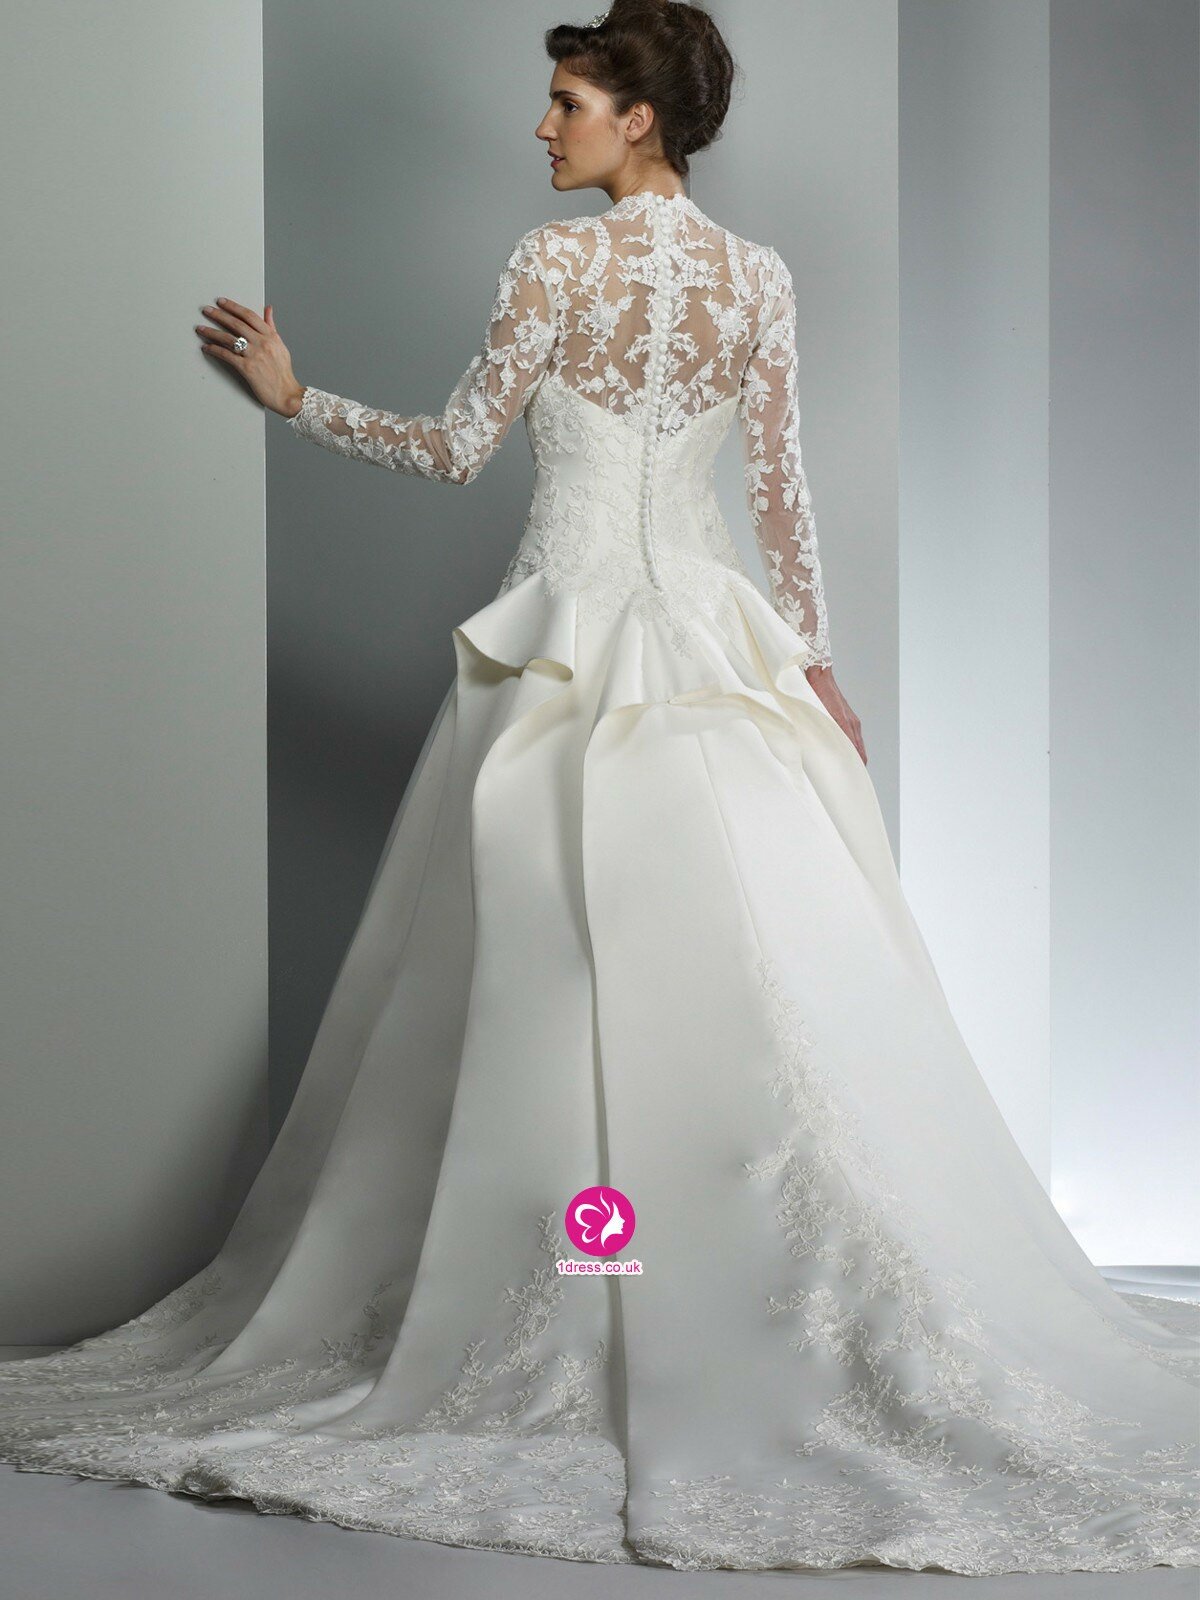 Wedding lace dresses with sleeves Photo - 1